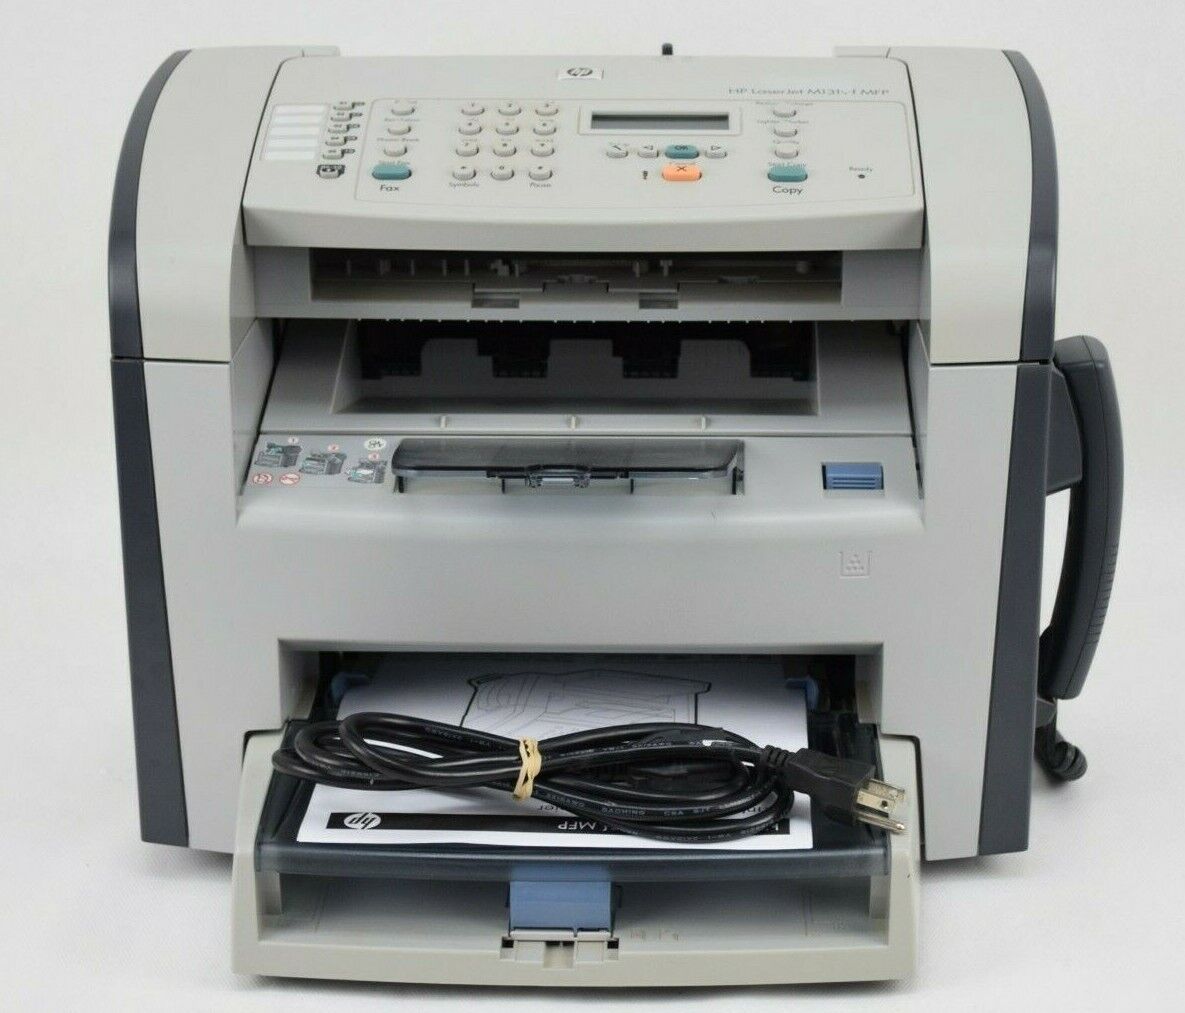 HP M1319f MFP FAX Printer Count High material Page Laser 10 Monochrome Soldering